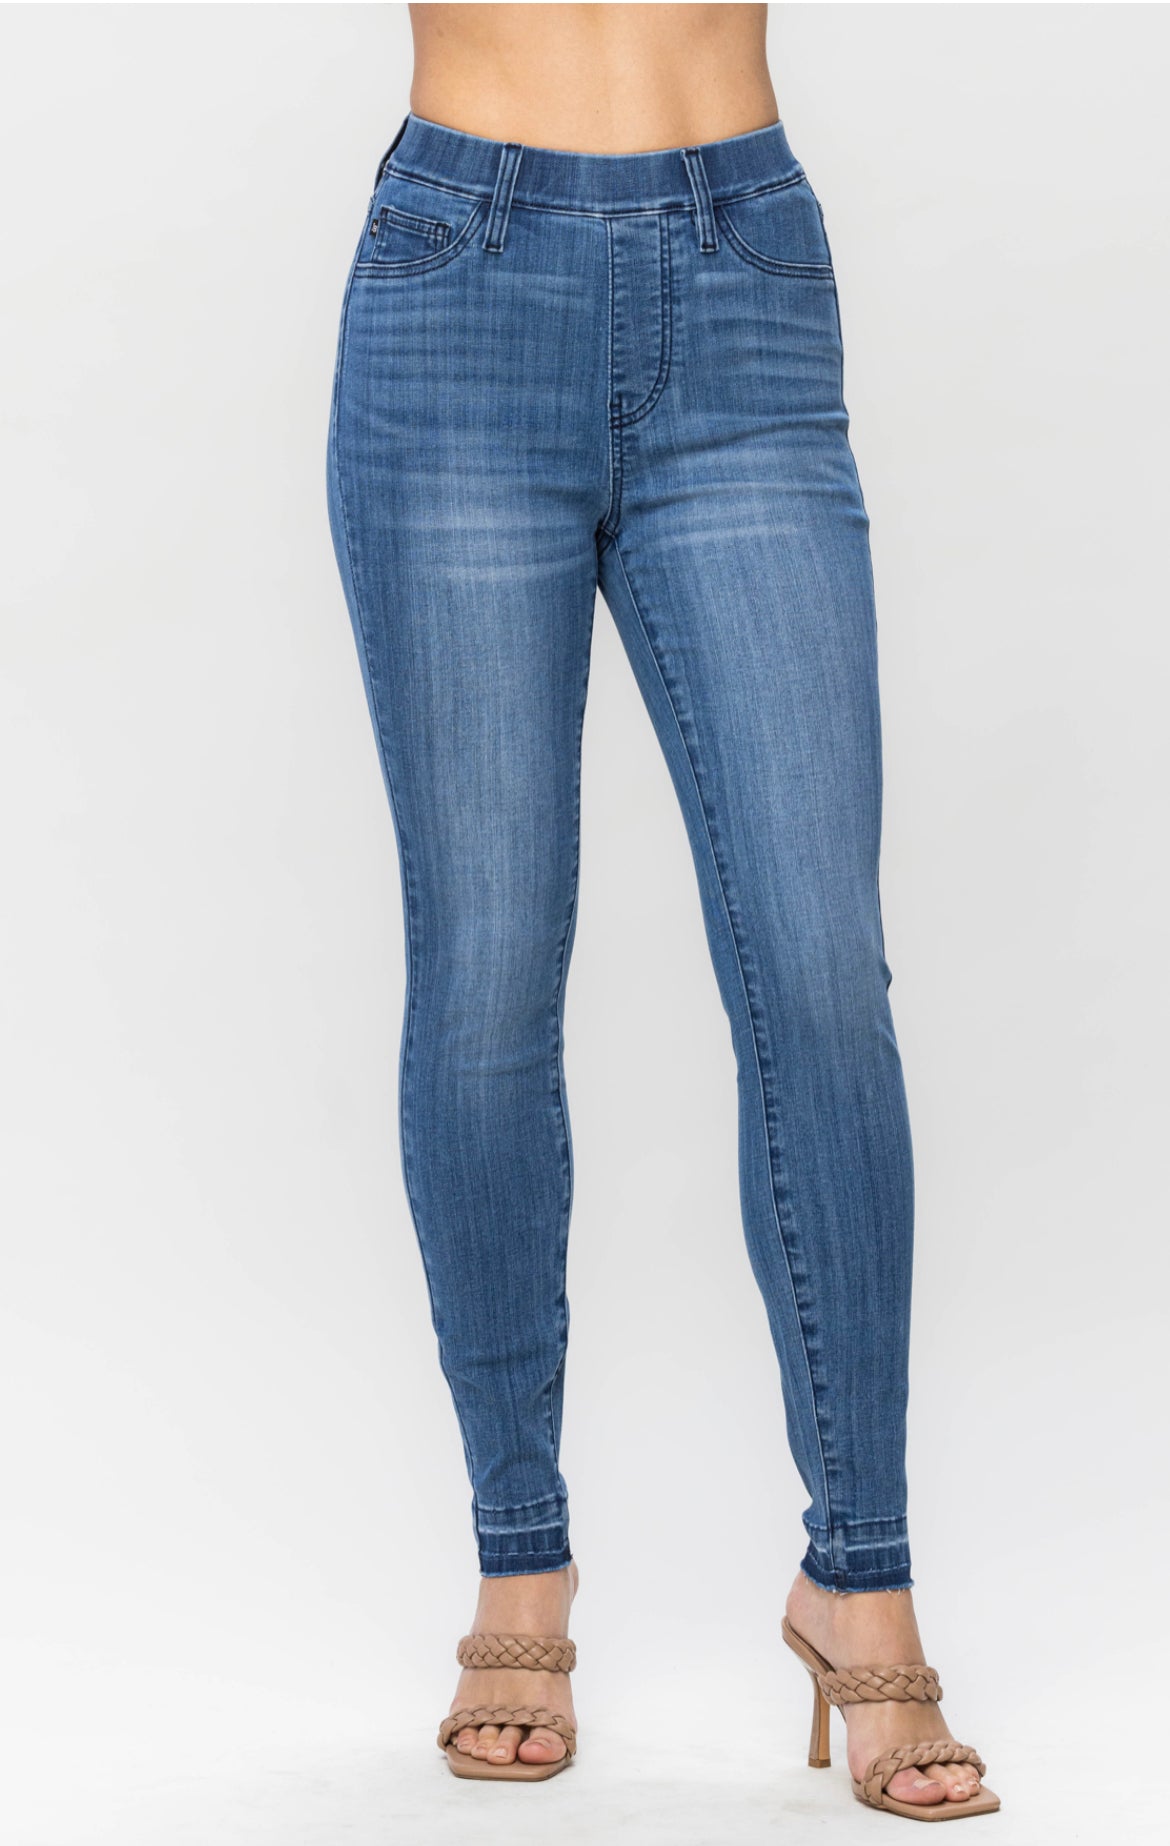 Down to Business Skinny Jeans